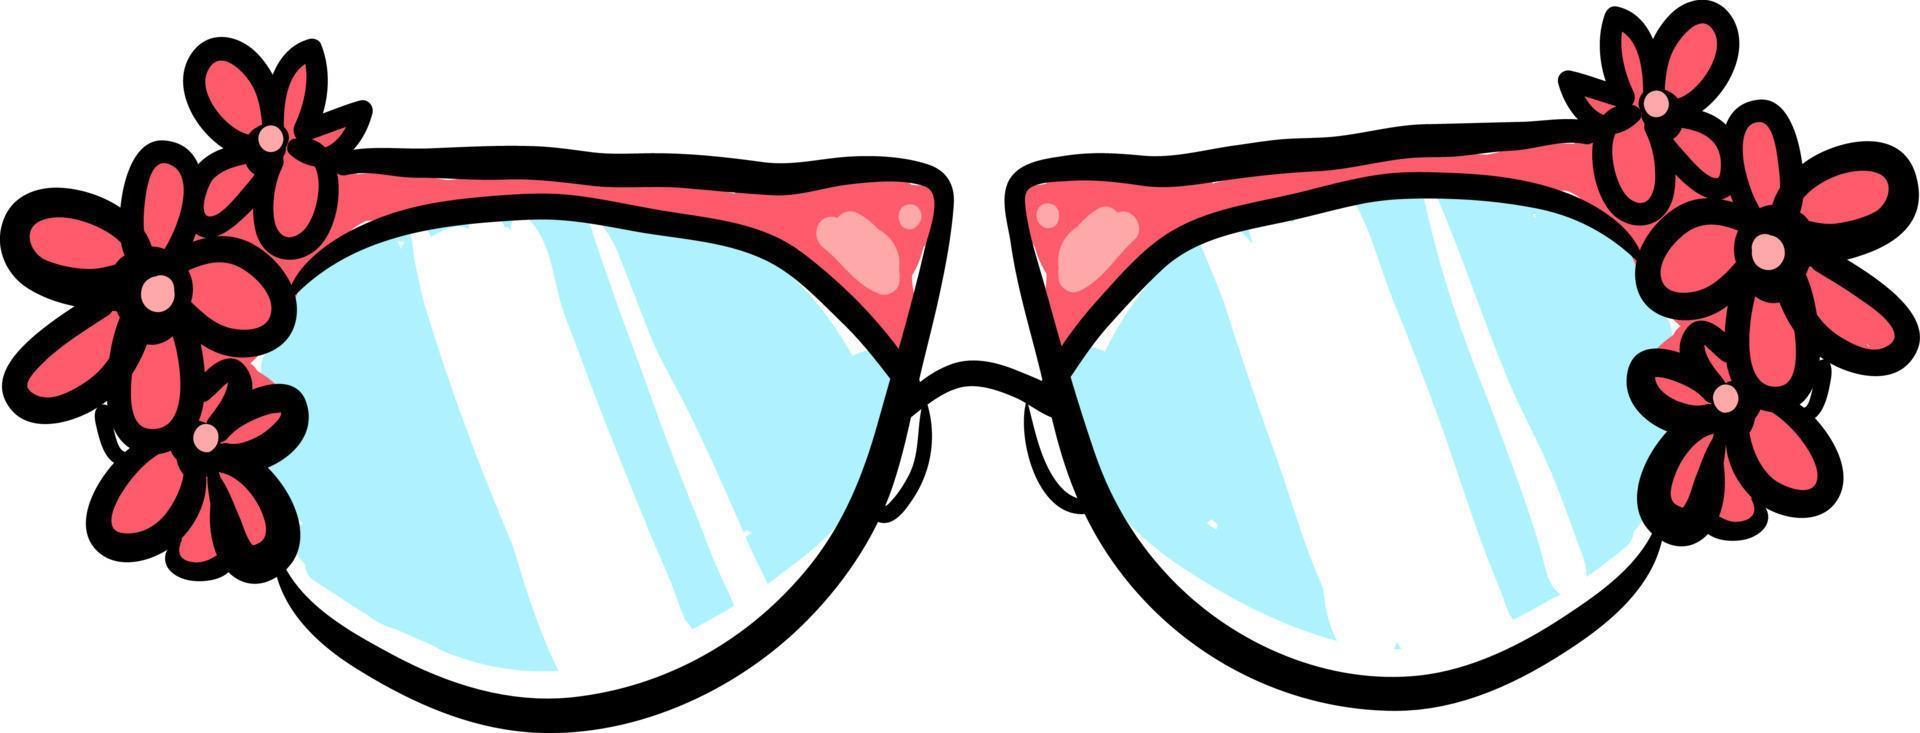 Cute floral glasses, illustration, vector on white background.